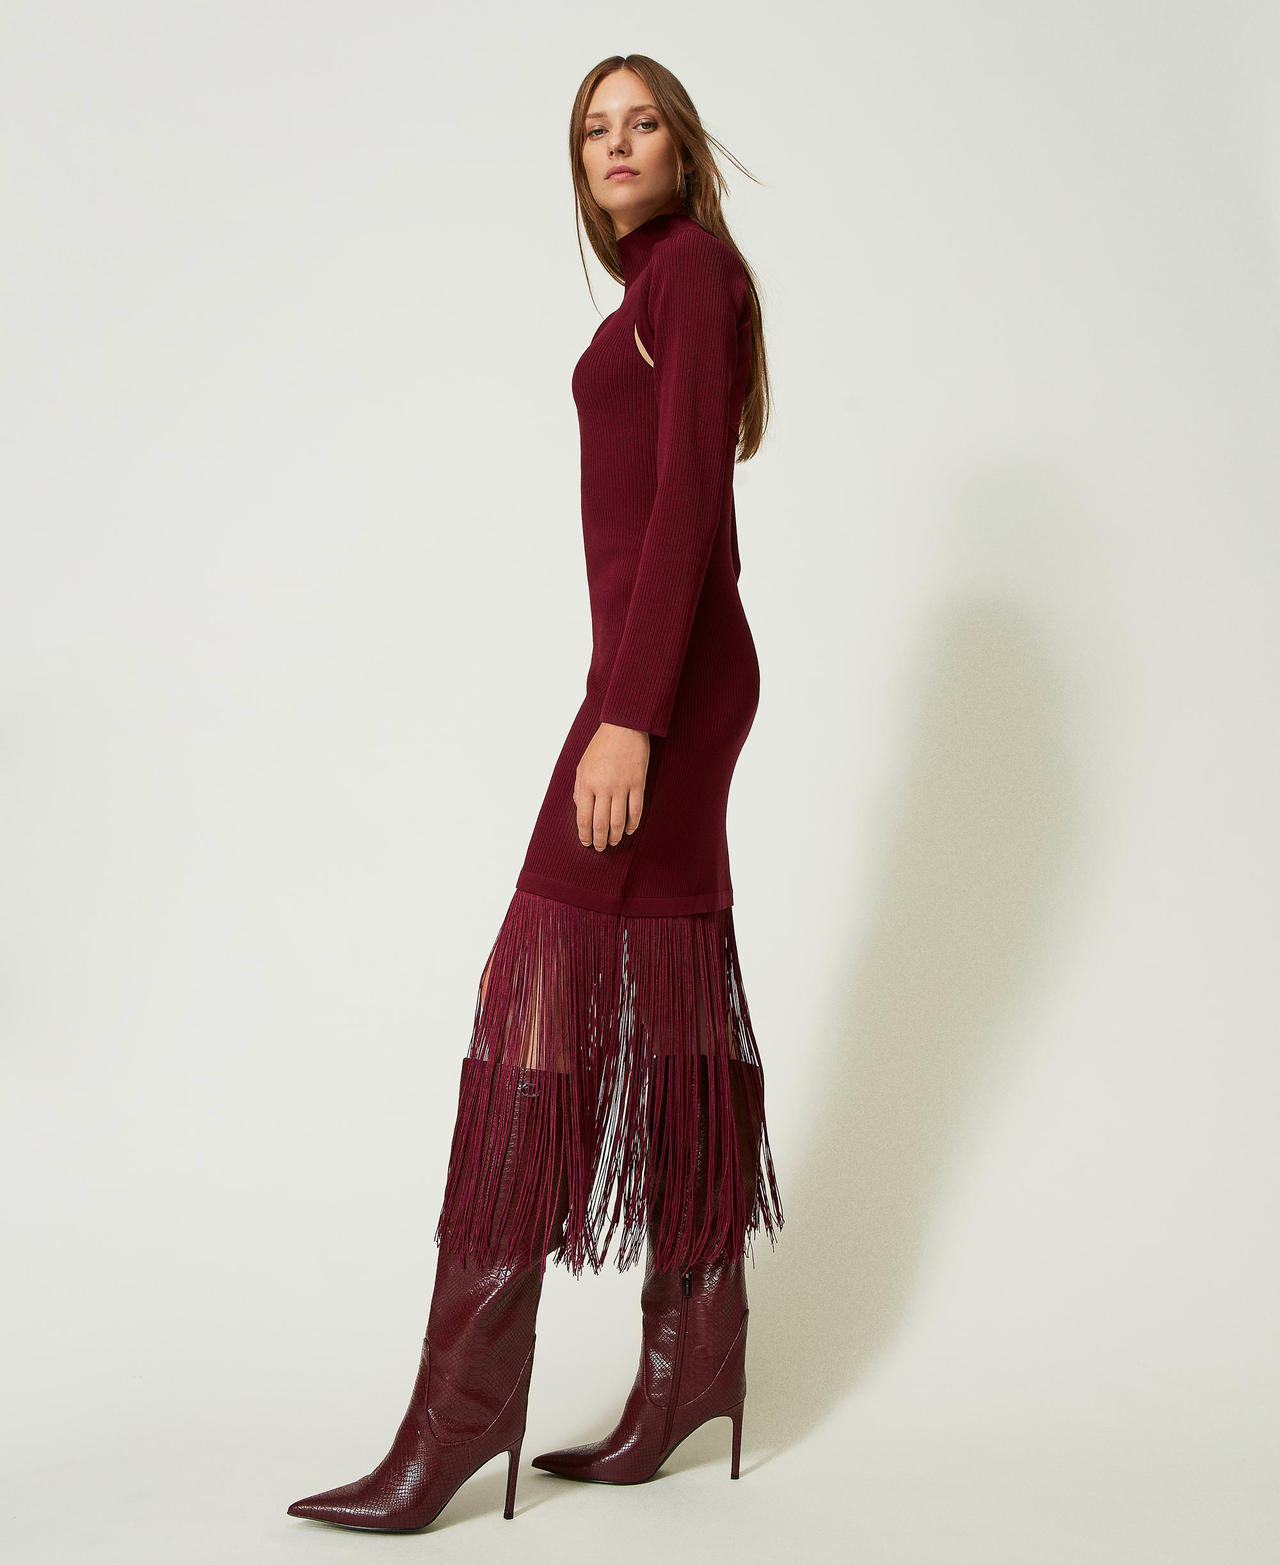 Long dress with fringes and shrug "Cabernet” Red Woman 232TT3281-02